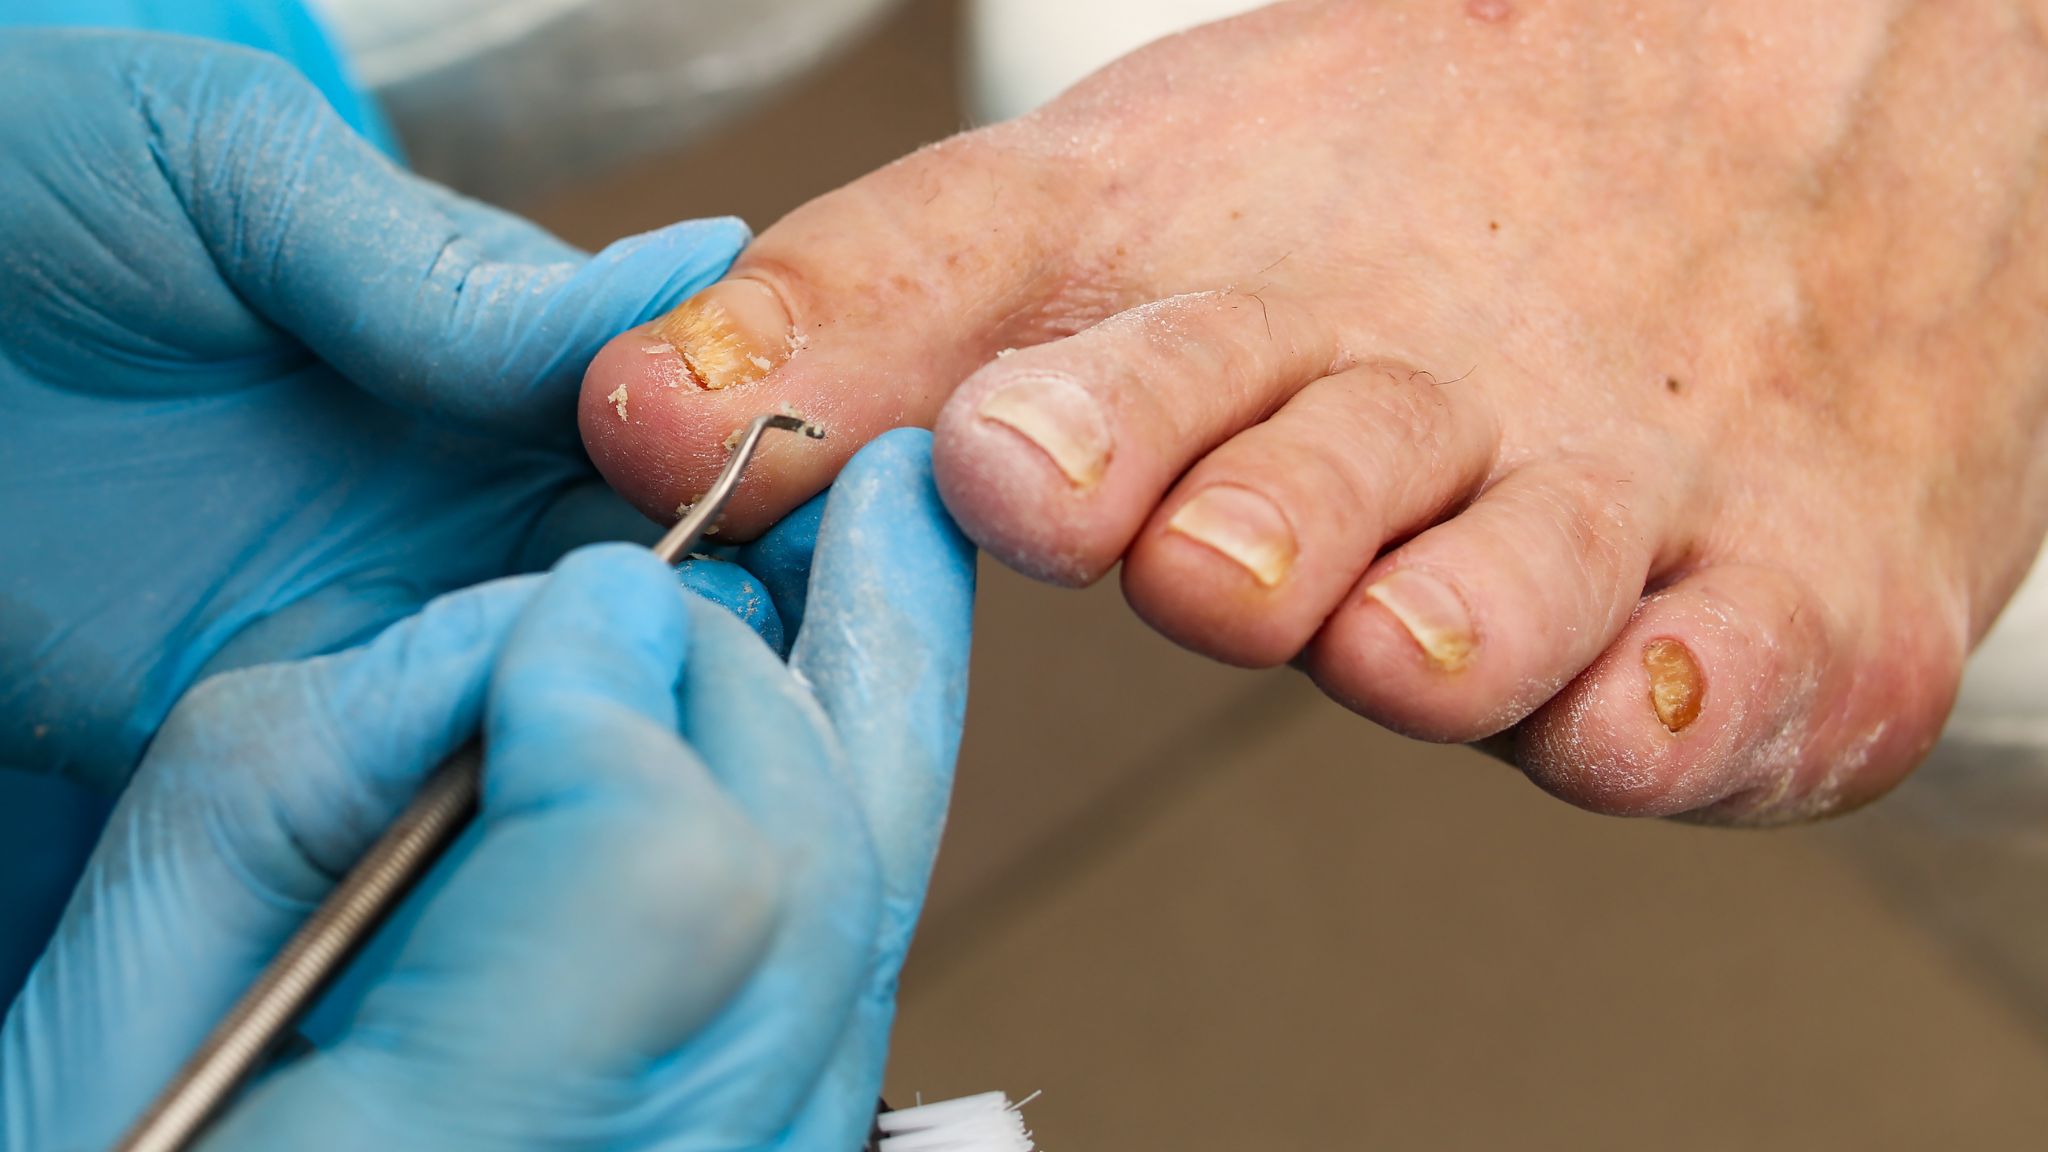 Treatment of an ingrown nail with a doctor's instrument, removal and disinfection